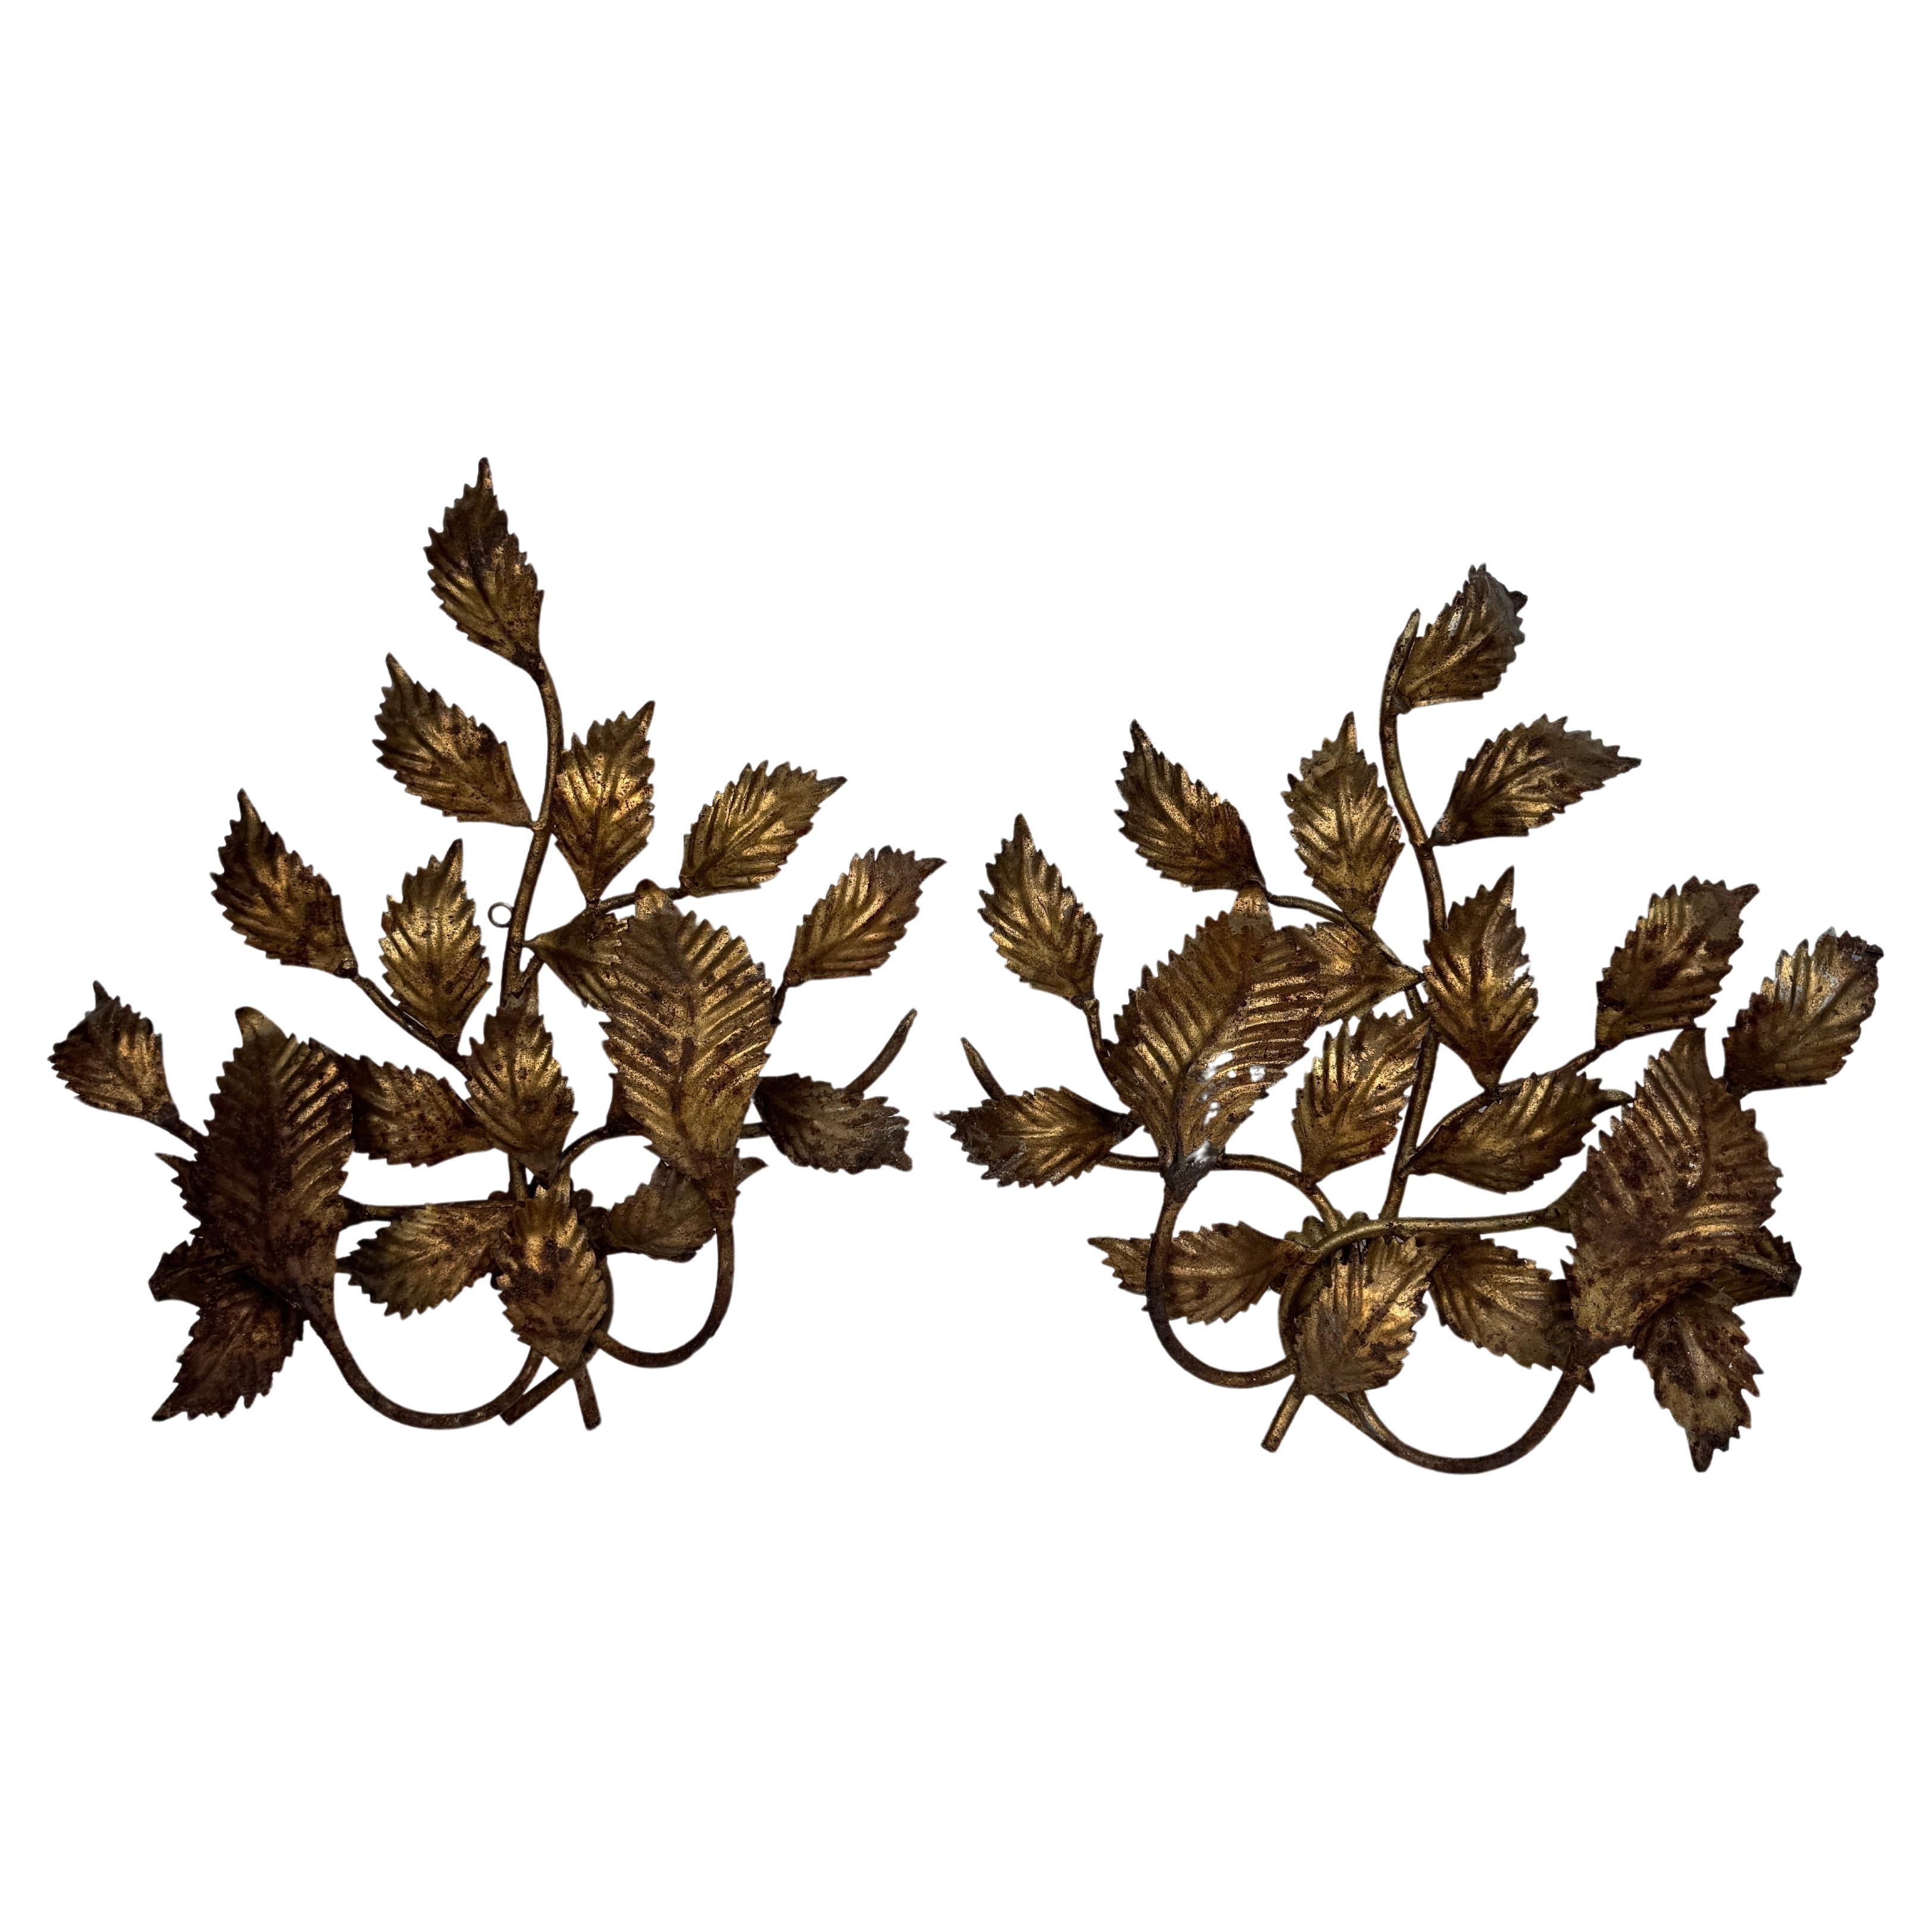 Italian Gilt Tole Wall Sconces, A Pair

Originally these Italian wall sconces were electrified and can be rewired if requested. This set is impressive as wall sculptures in a living or dining room setting. 